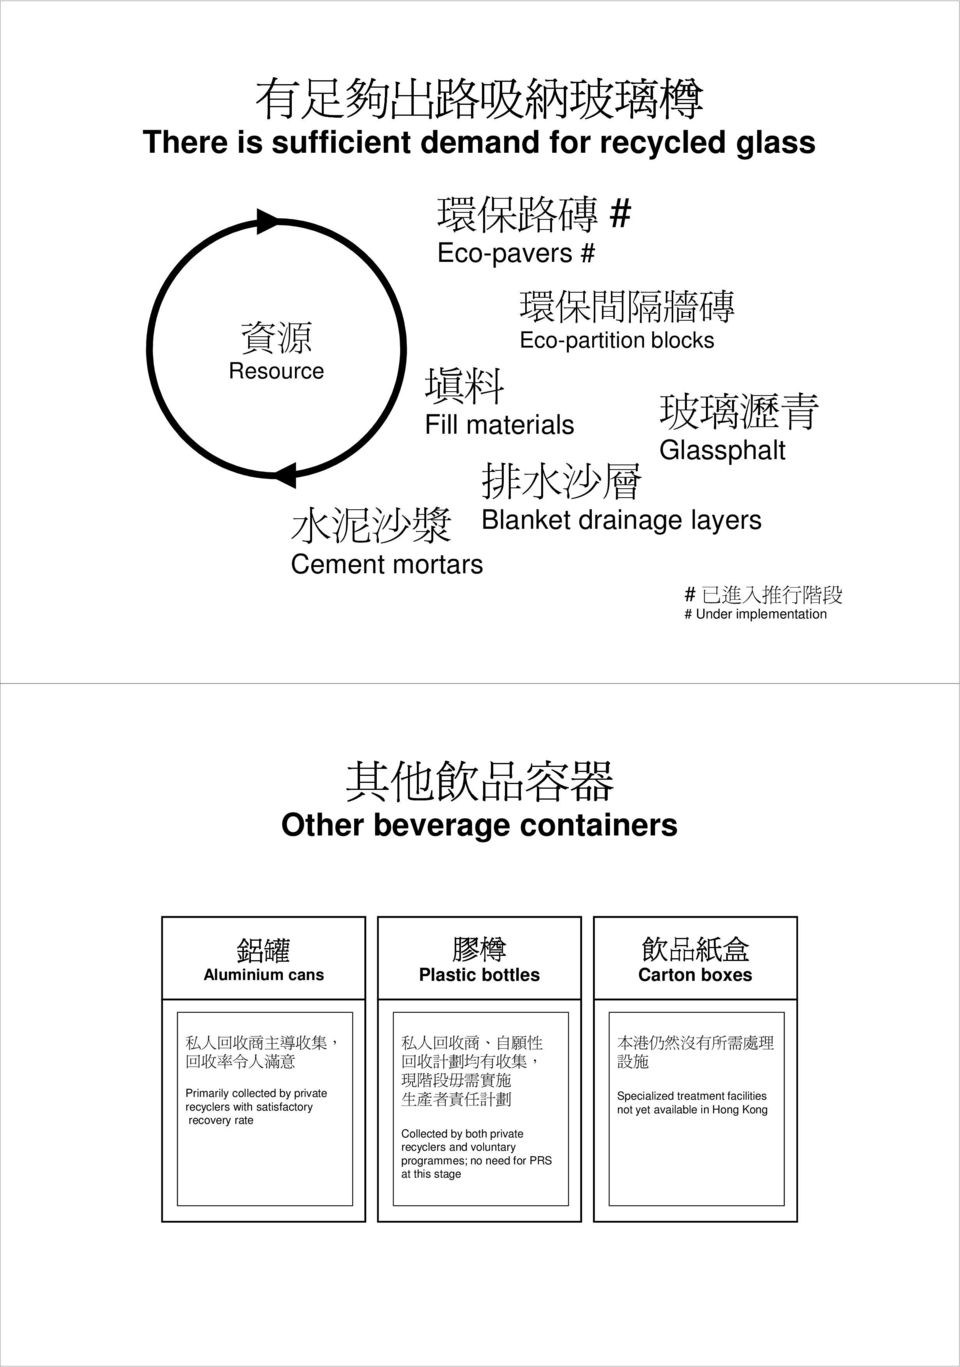 Carton boxes 私 人 回 收 商 主 導 收 集, 回 收 率 令 人 滿 意 Primarily collected by private recyclers with satisfactory recovery rate 私 人 回 收 商 自 願 性 回 收 計 劃 均 有 收 集, 現 階 段 毋 需 實 施 生 產 者 責 任 計